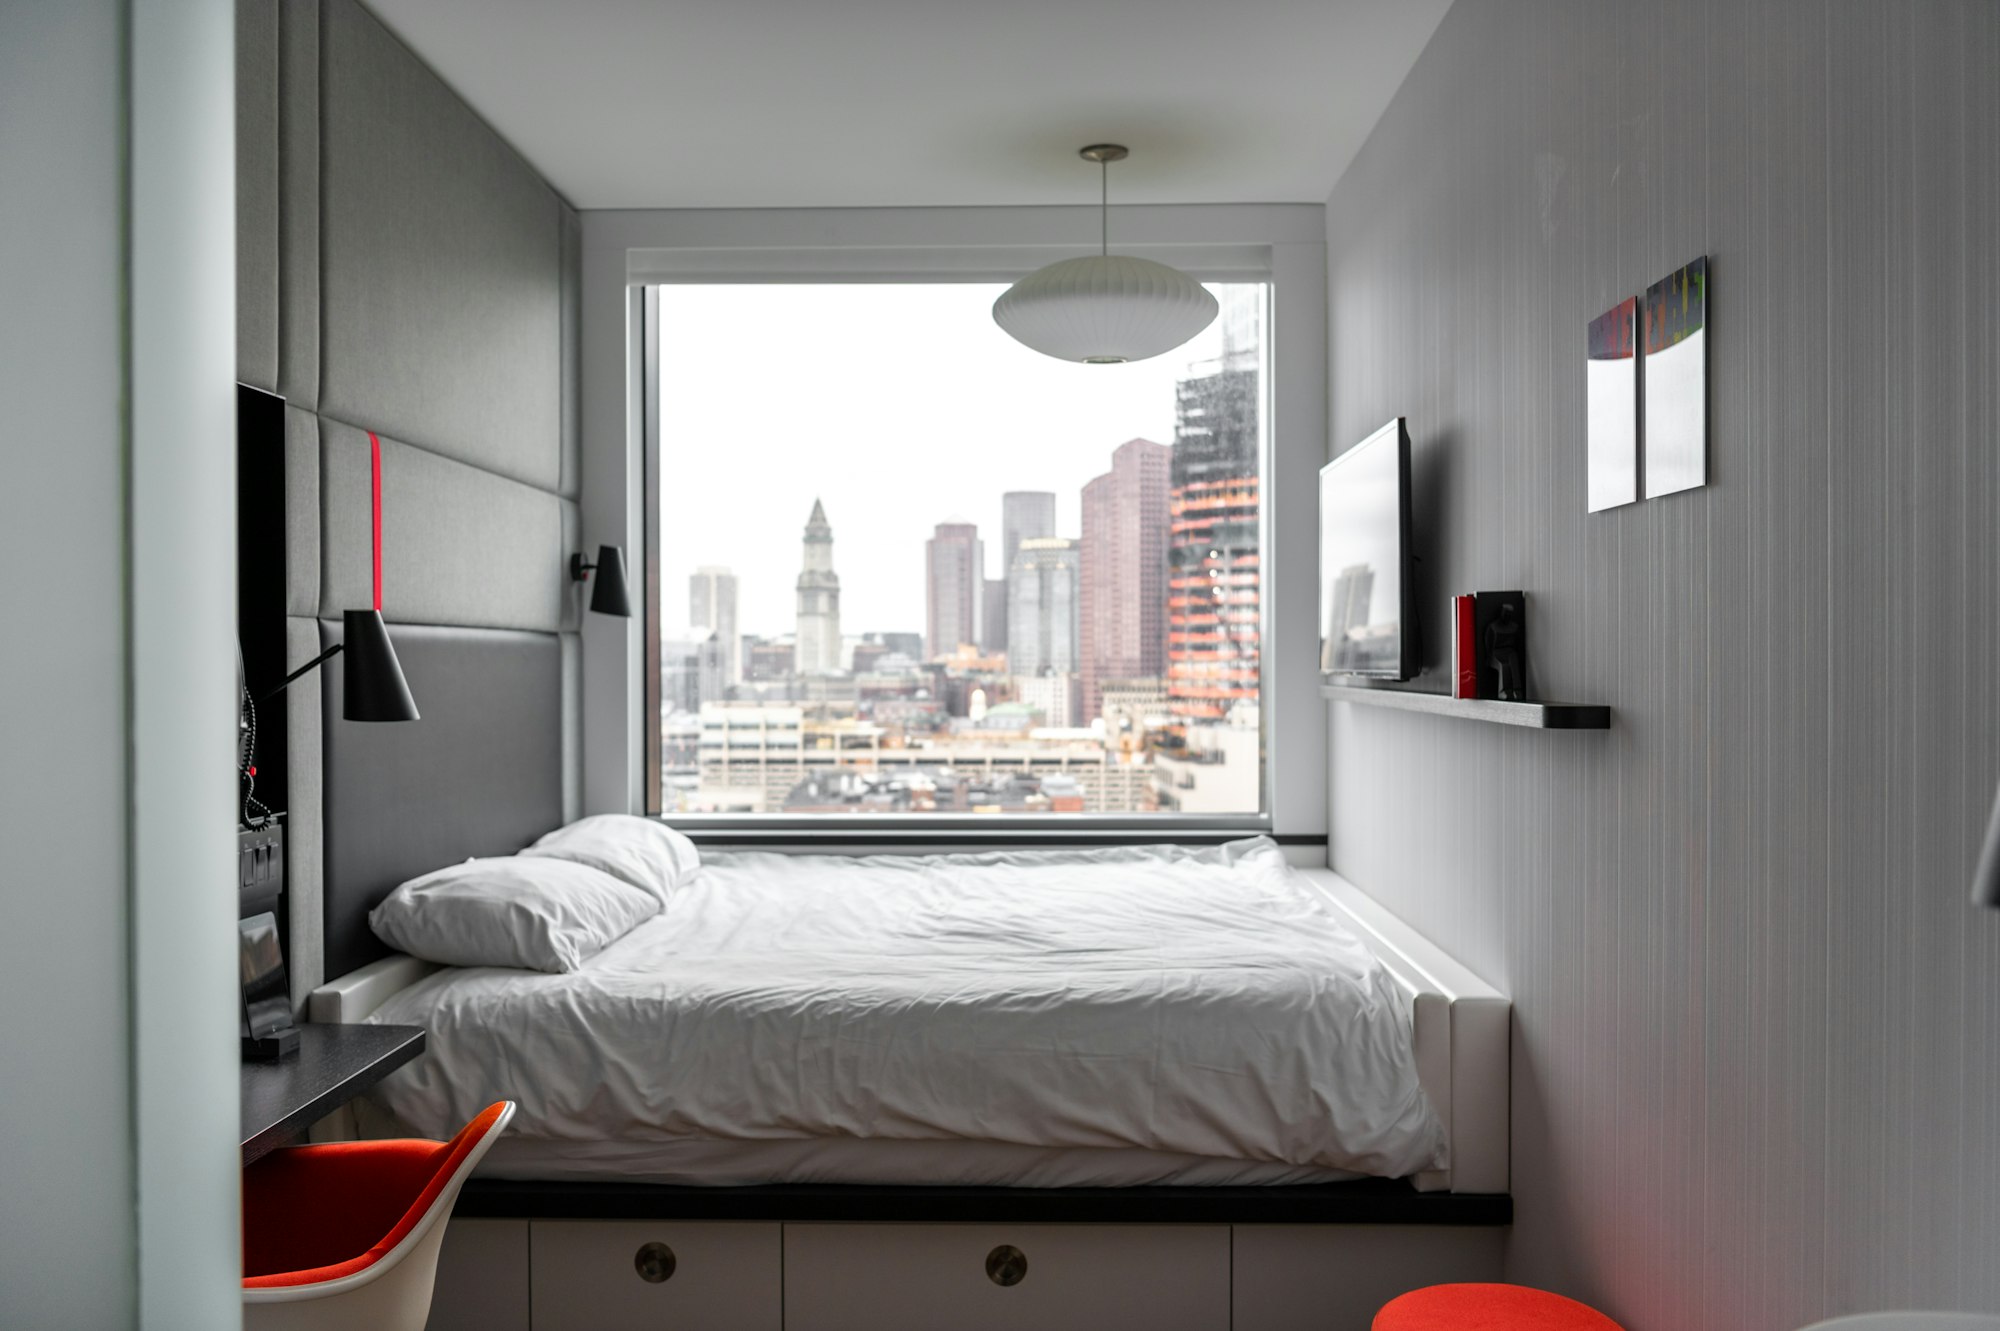 A bedside window of a condominium with skyline view.